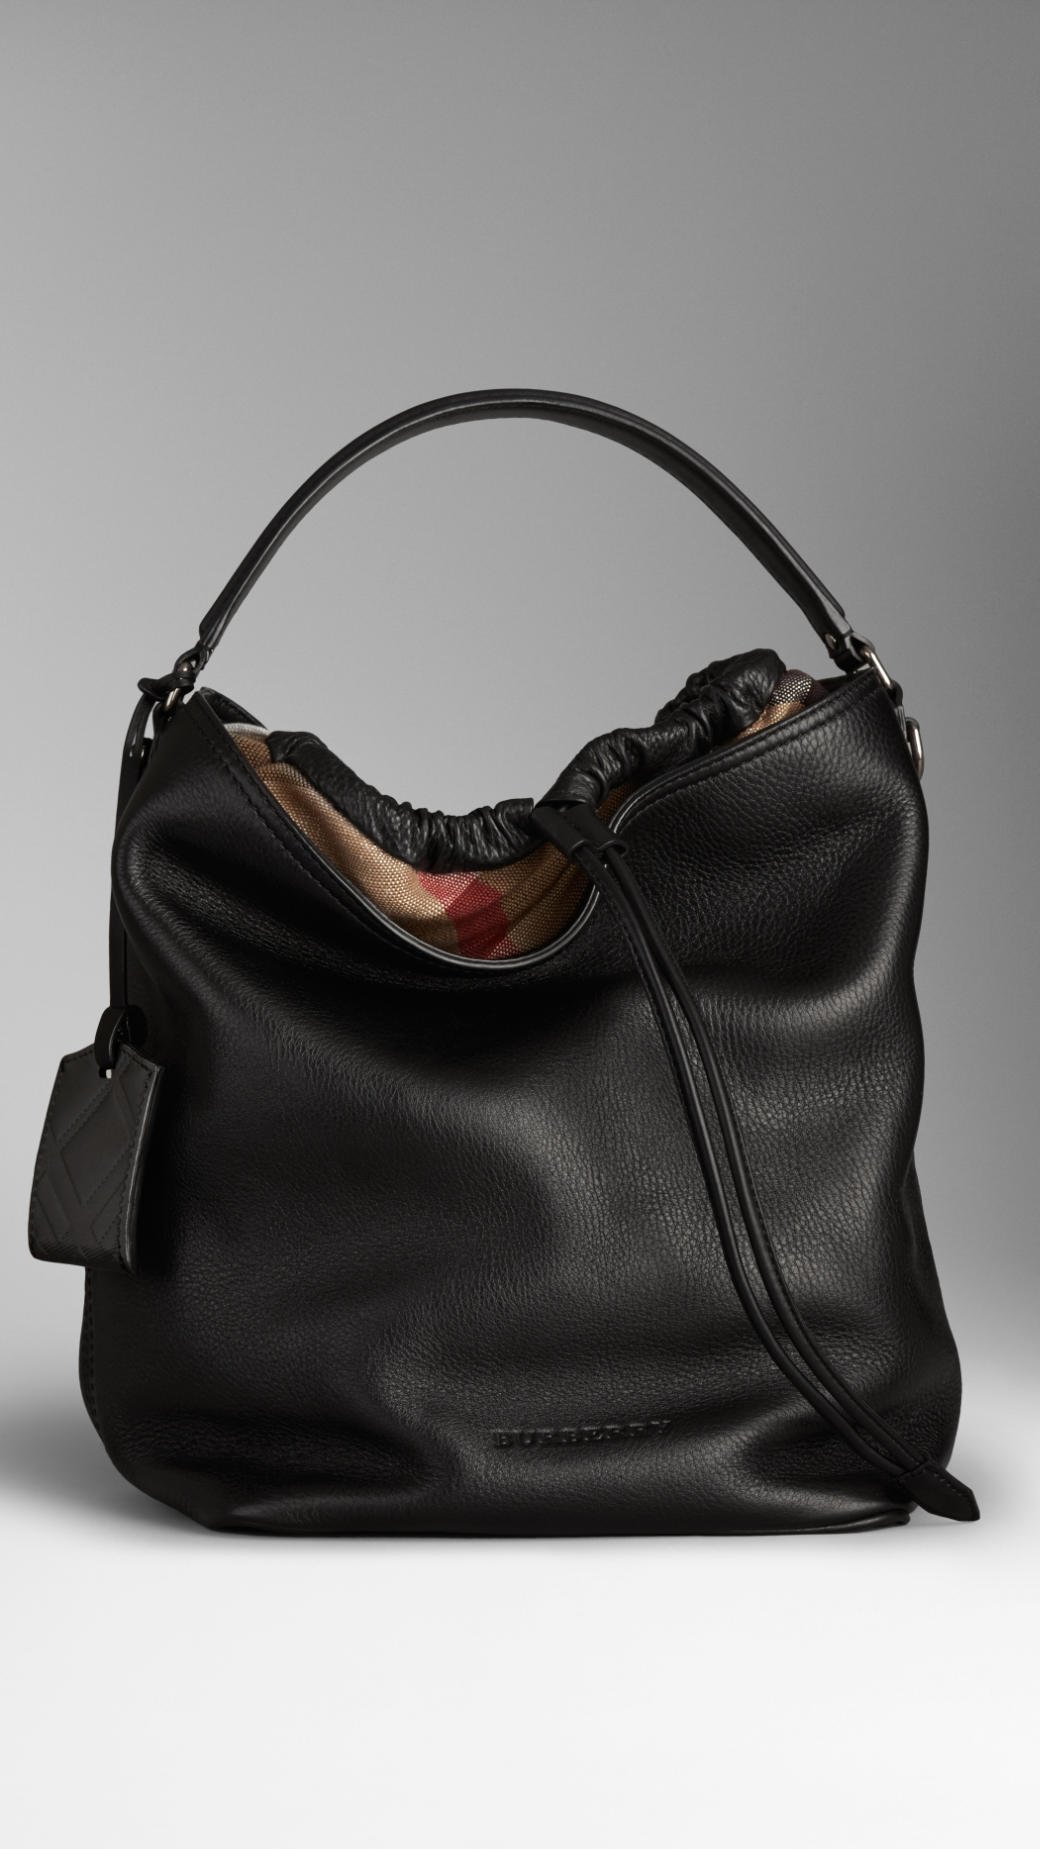 Burberry Medium Canvas Check Leather Hobo Bag in Black | Lyst